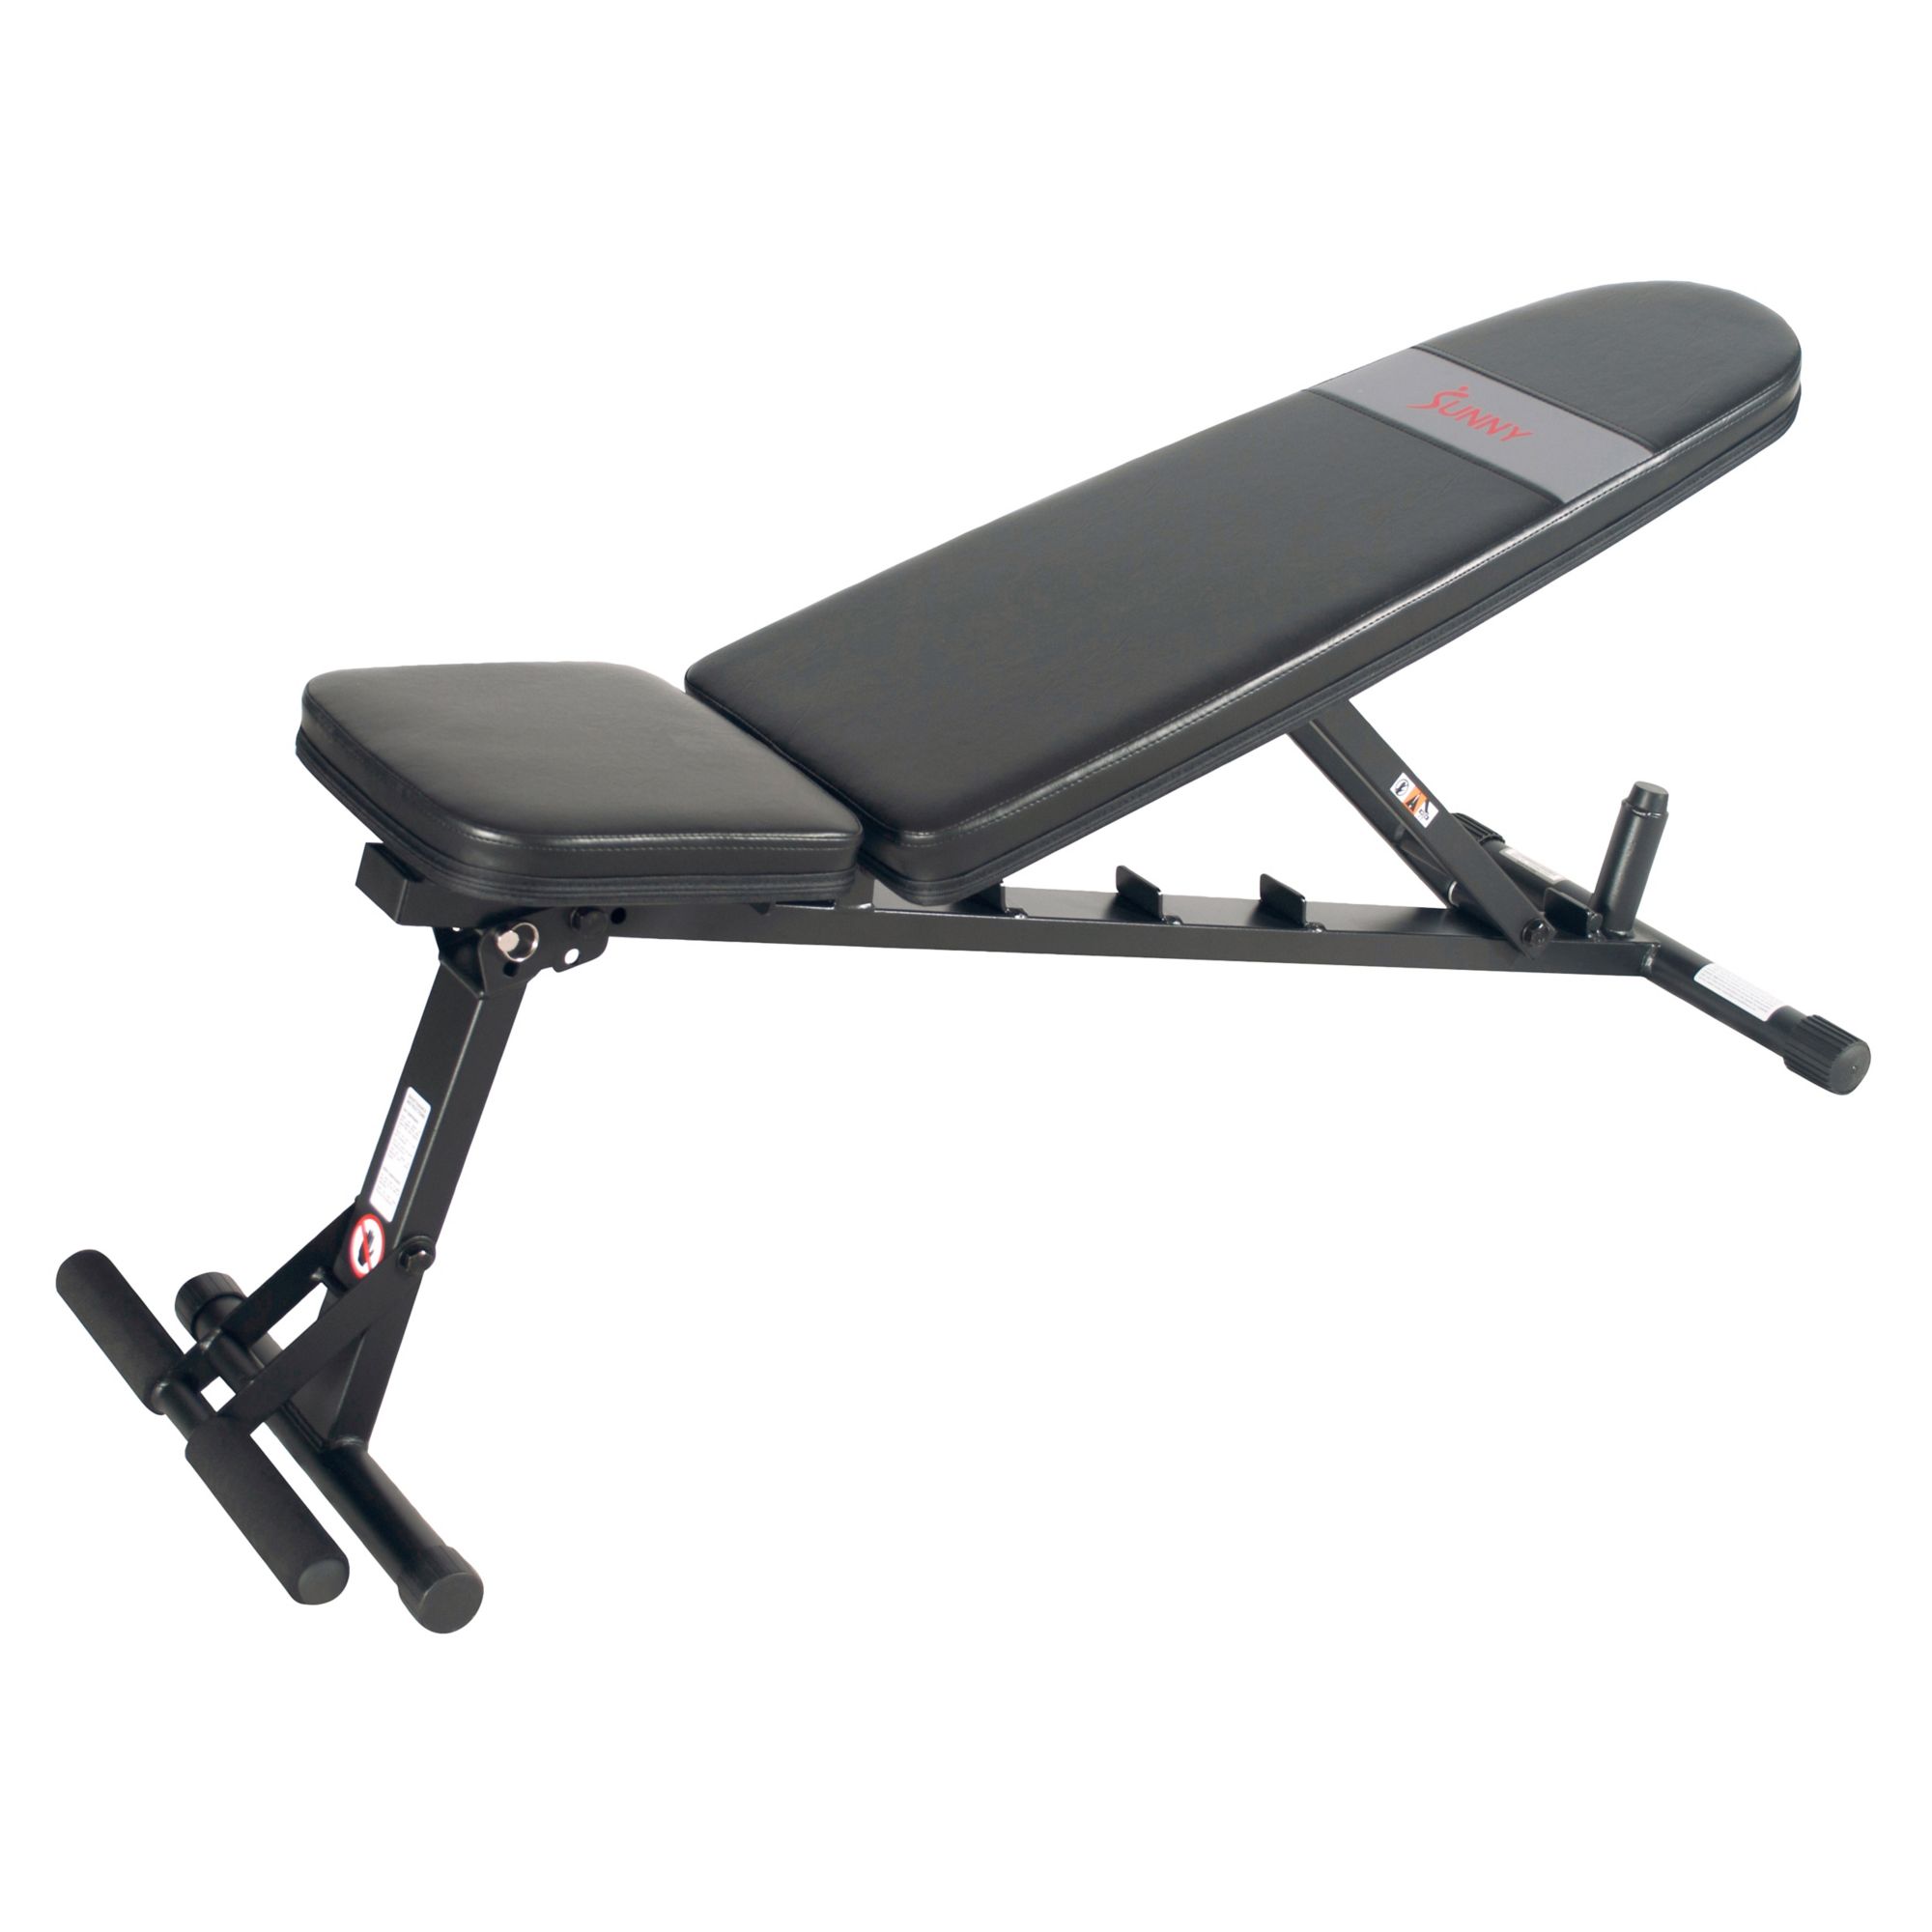 Proform Ultimate Body Works Exercise Bench